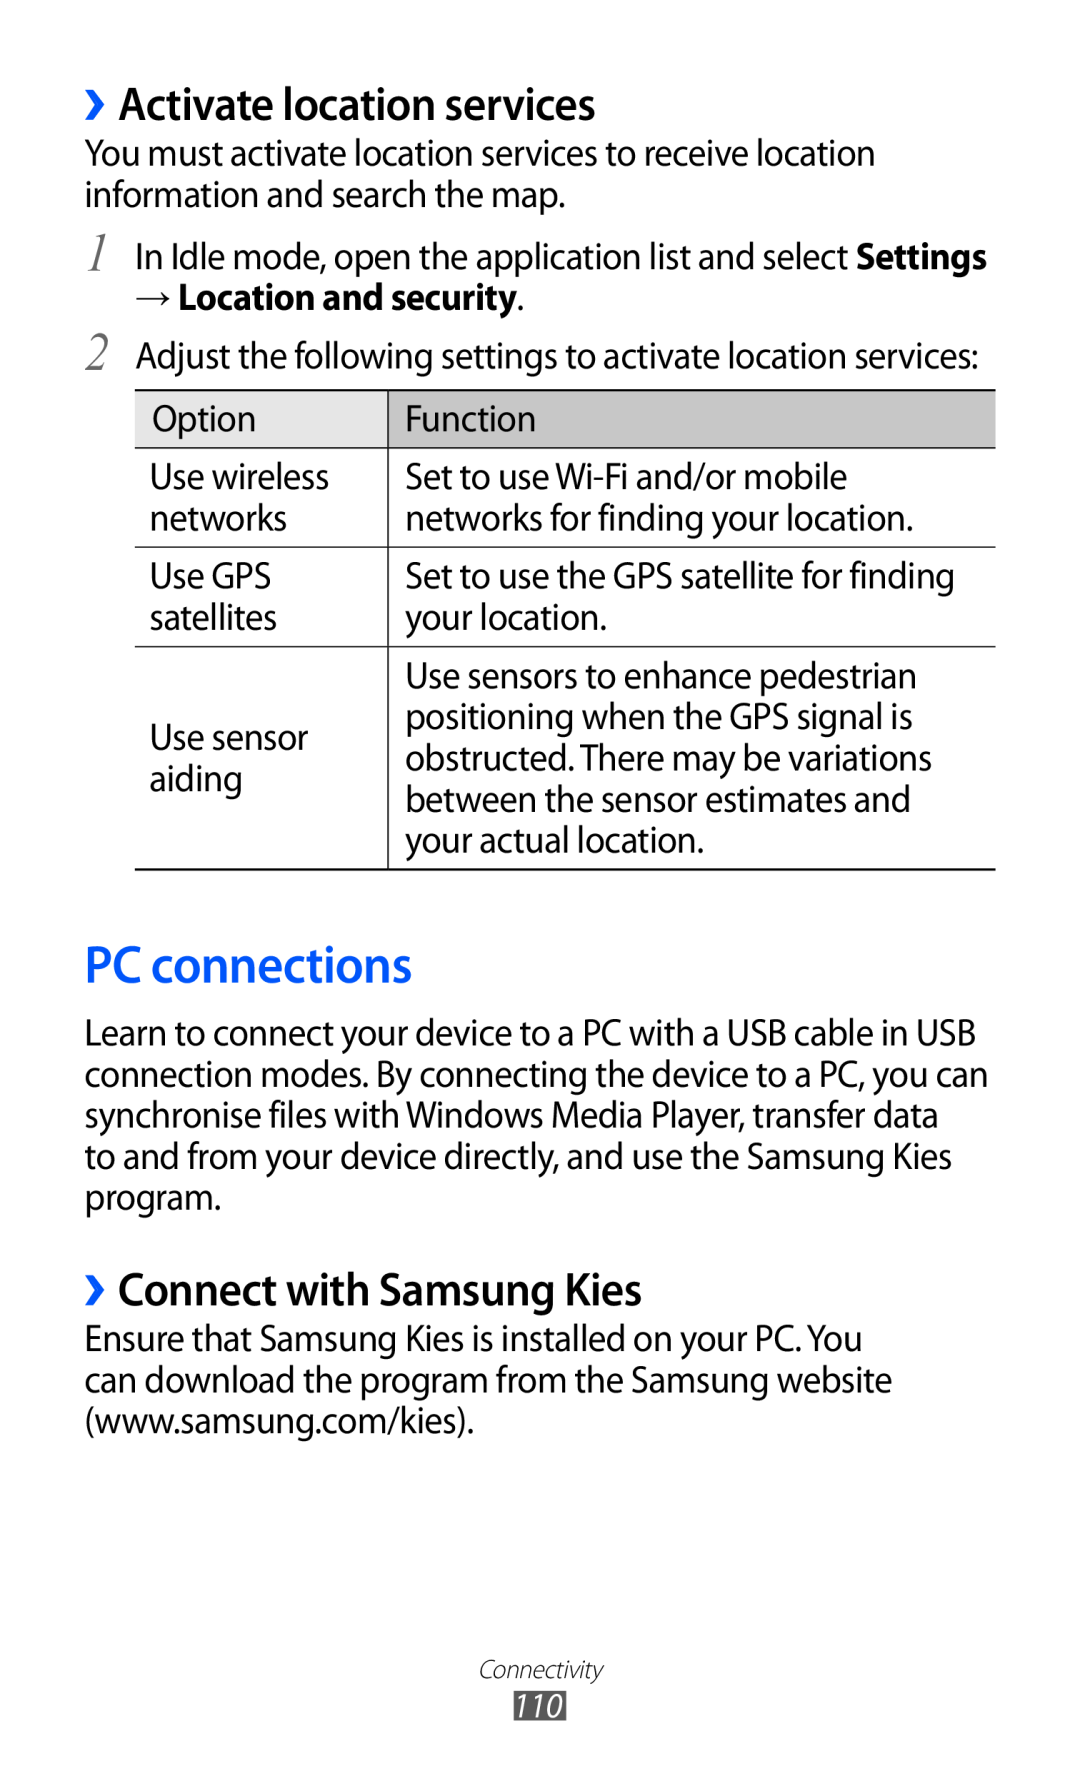 Samsung GT-I9070RWAXXV PC connections, ››Activate location services, ››Connect with Samsung Kies, → Location and security 